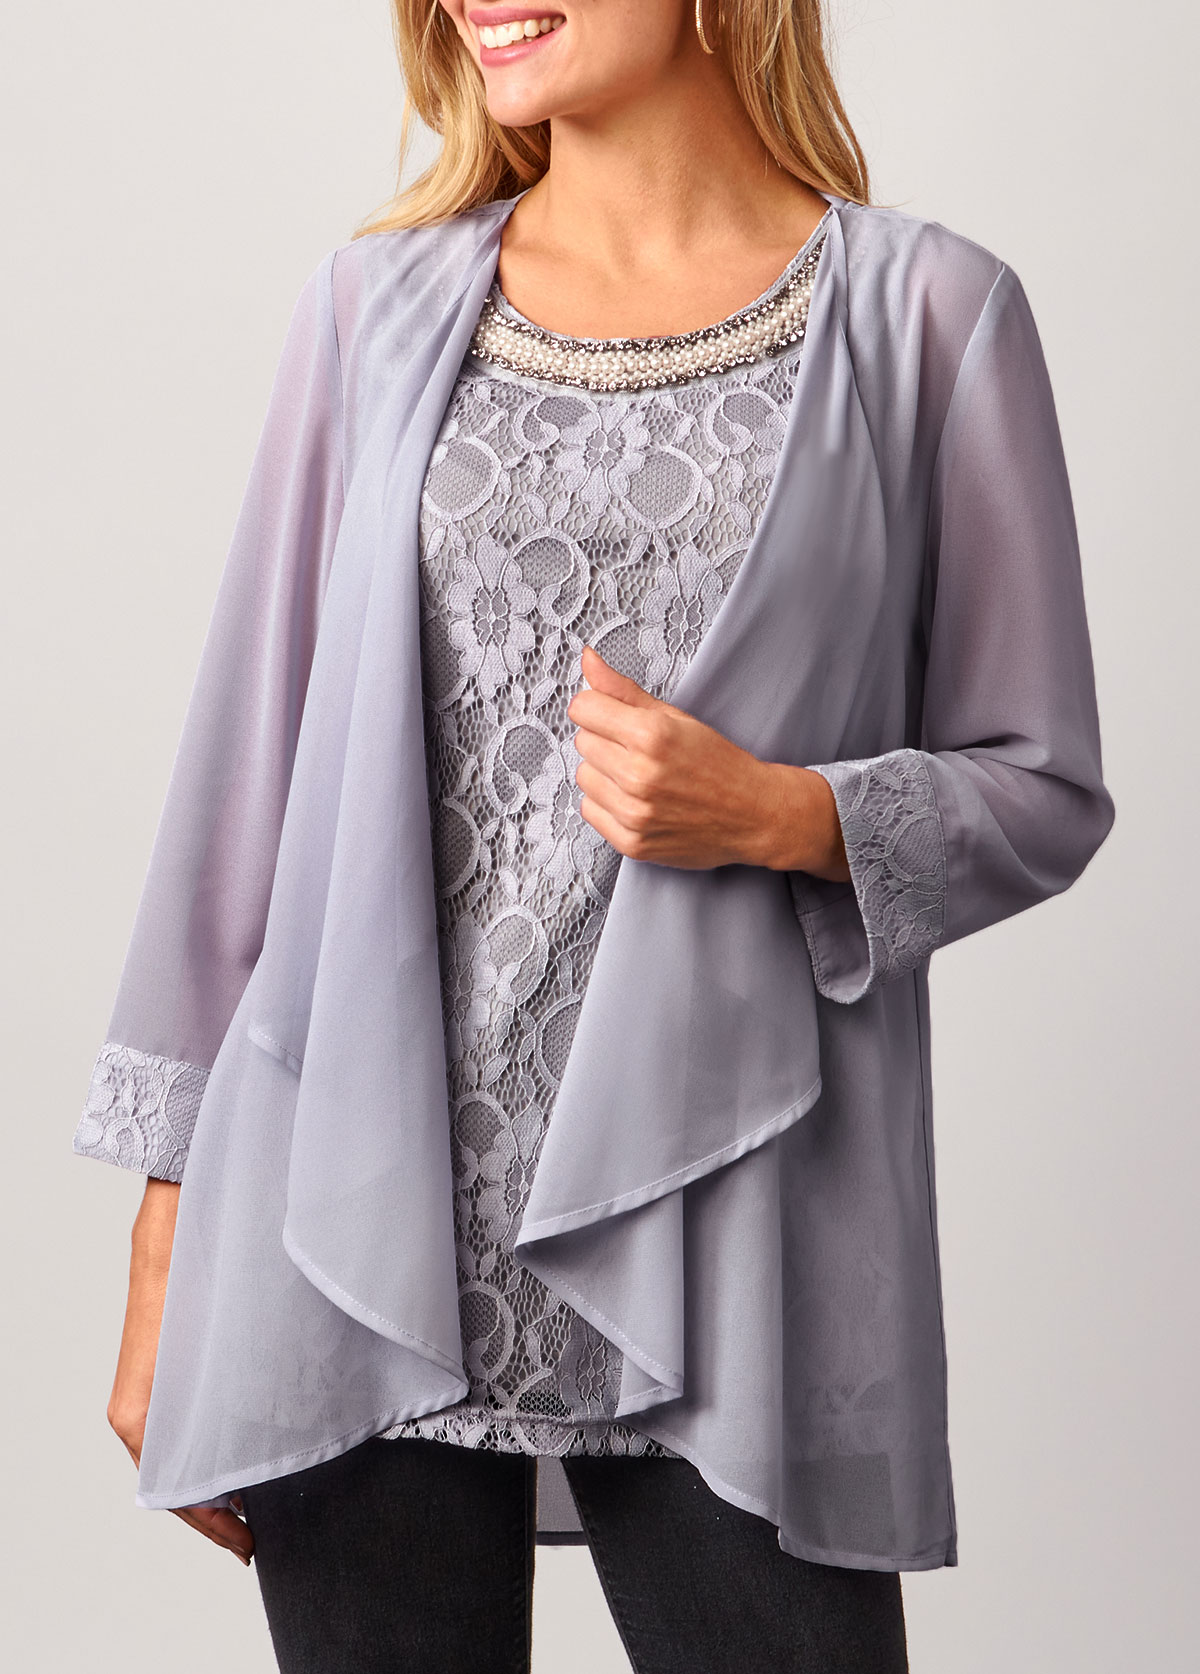 Lace Patchwork Cardigan and Grey Tank Top